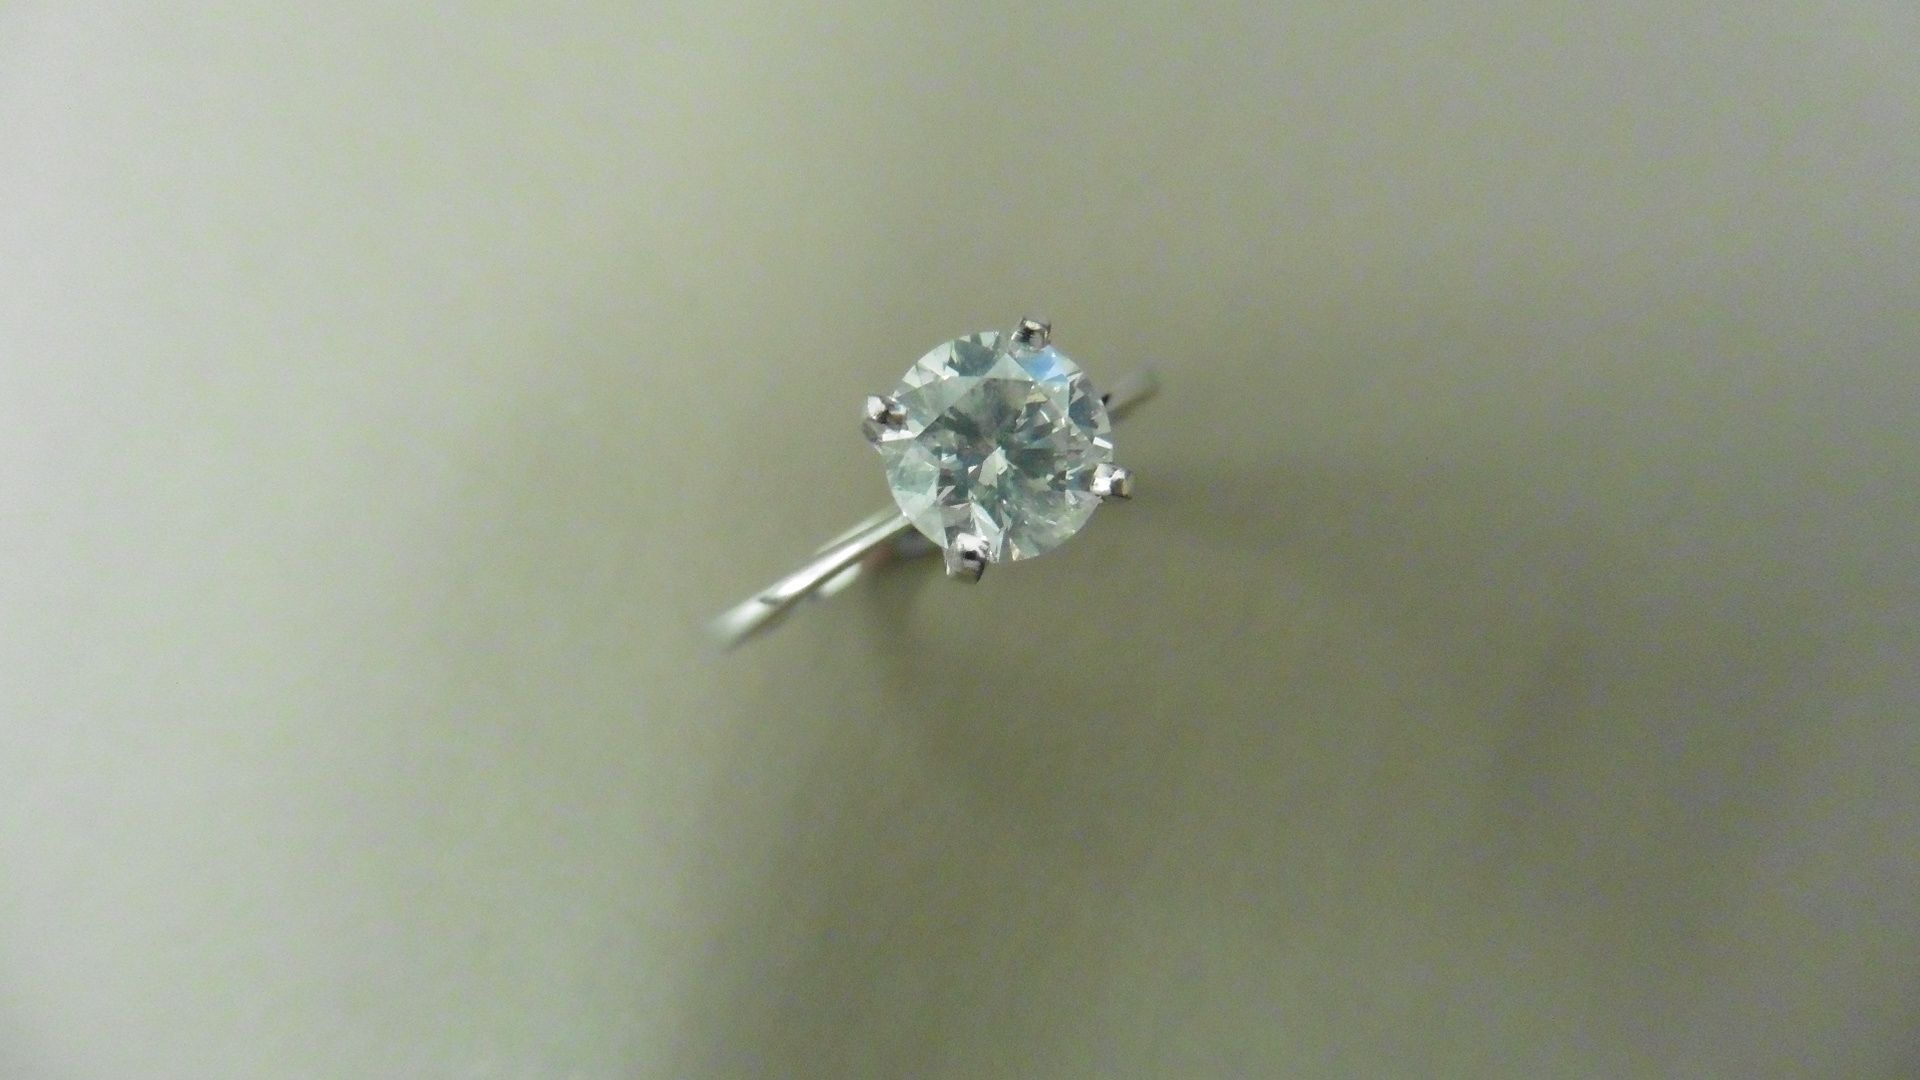 1.16ct diamond solitaire ring with a brilliant cut diamond. H colour and I1 clarity. Set in platinum